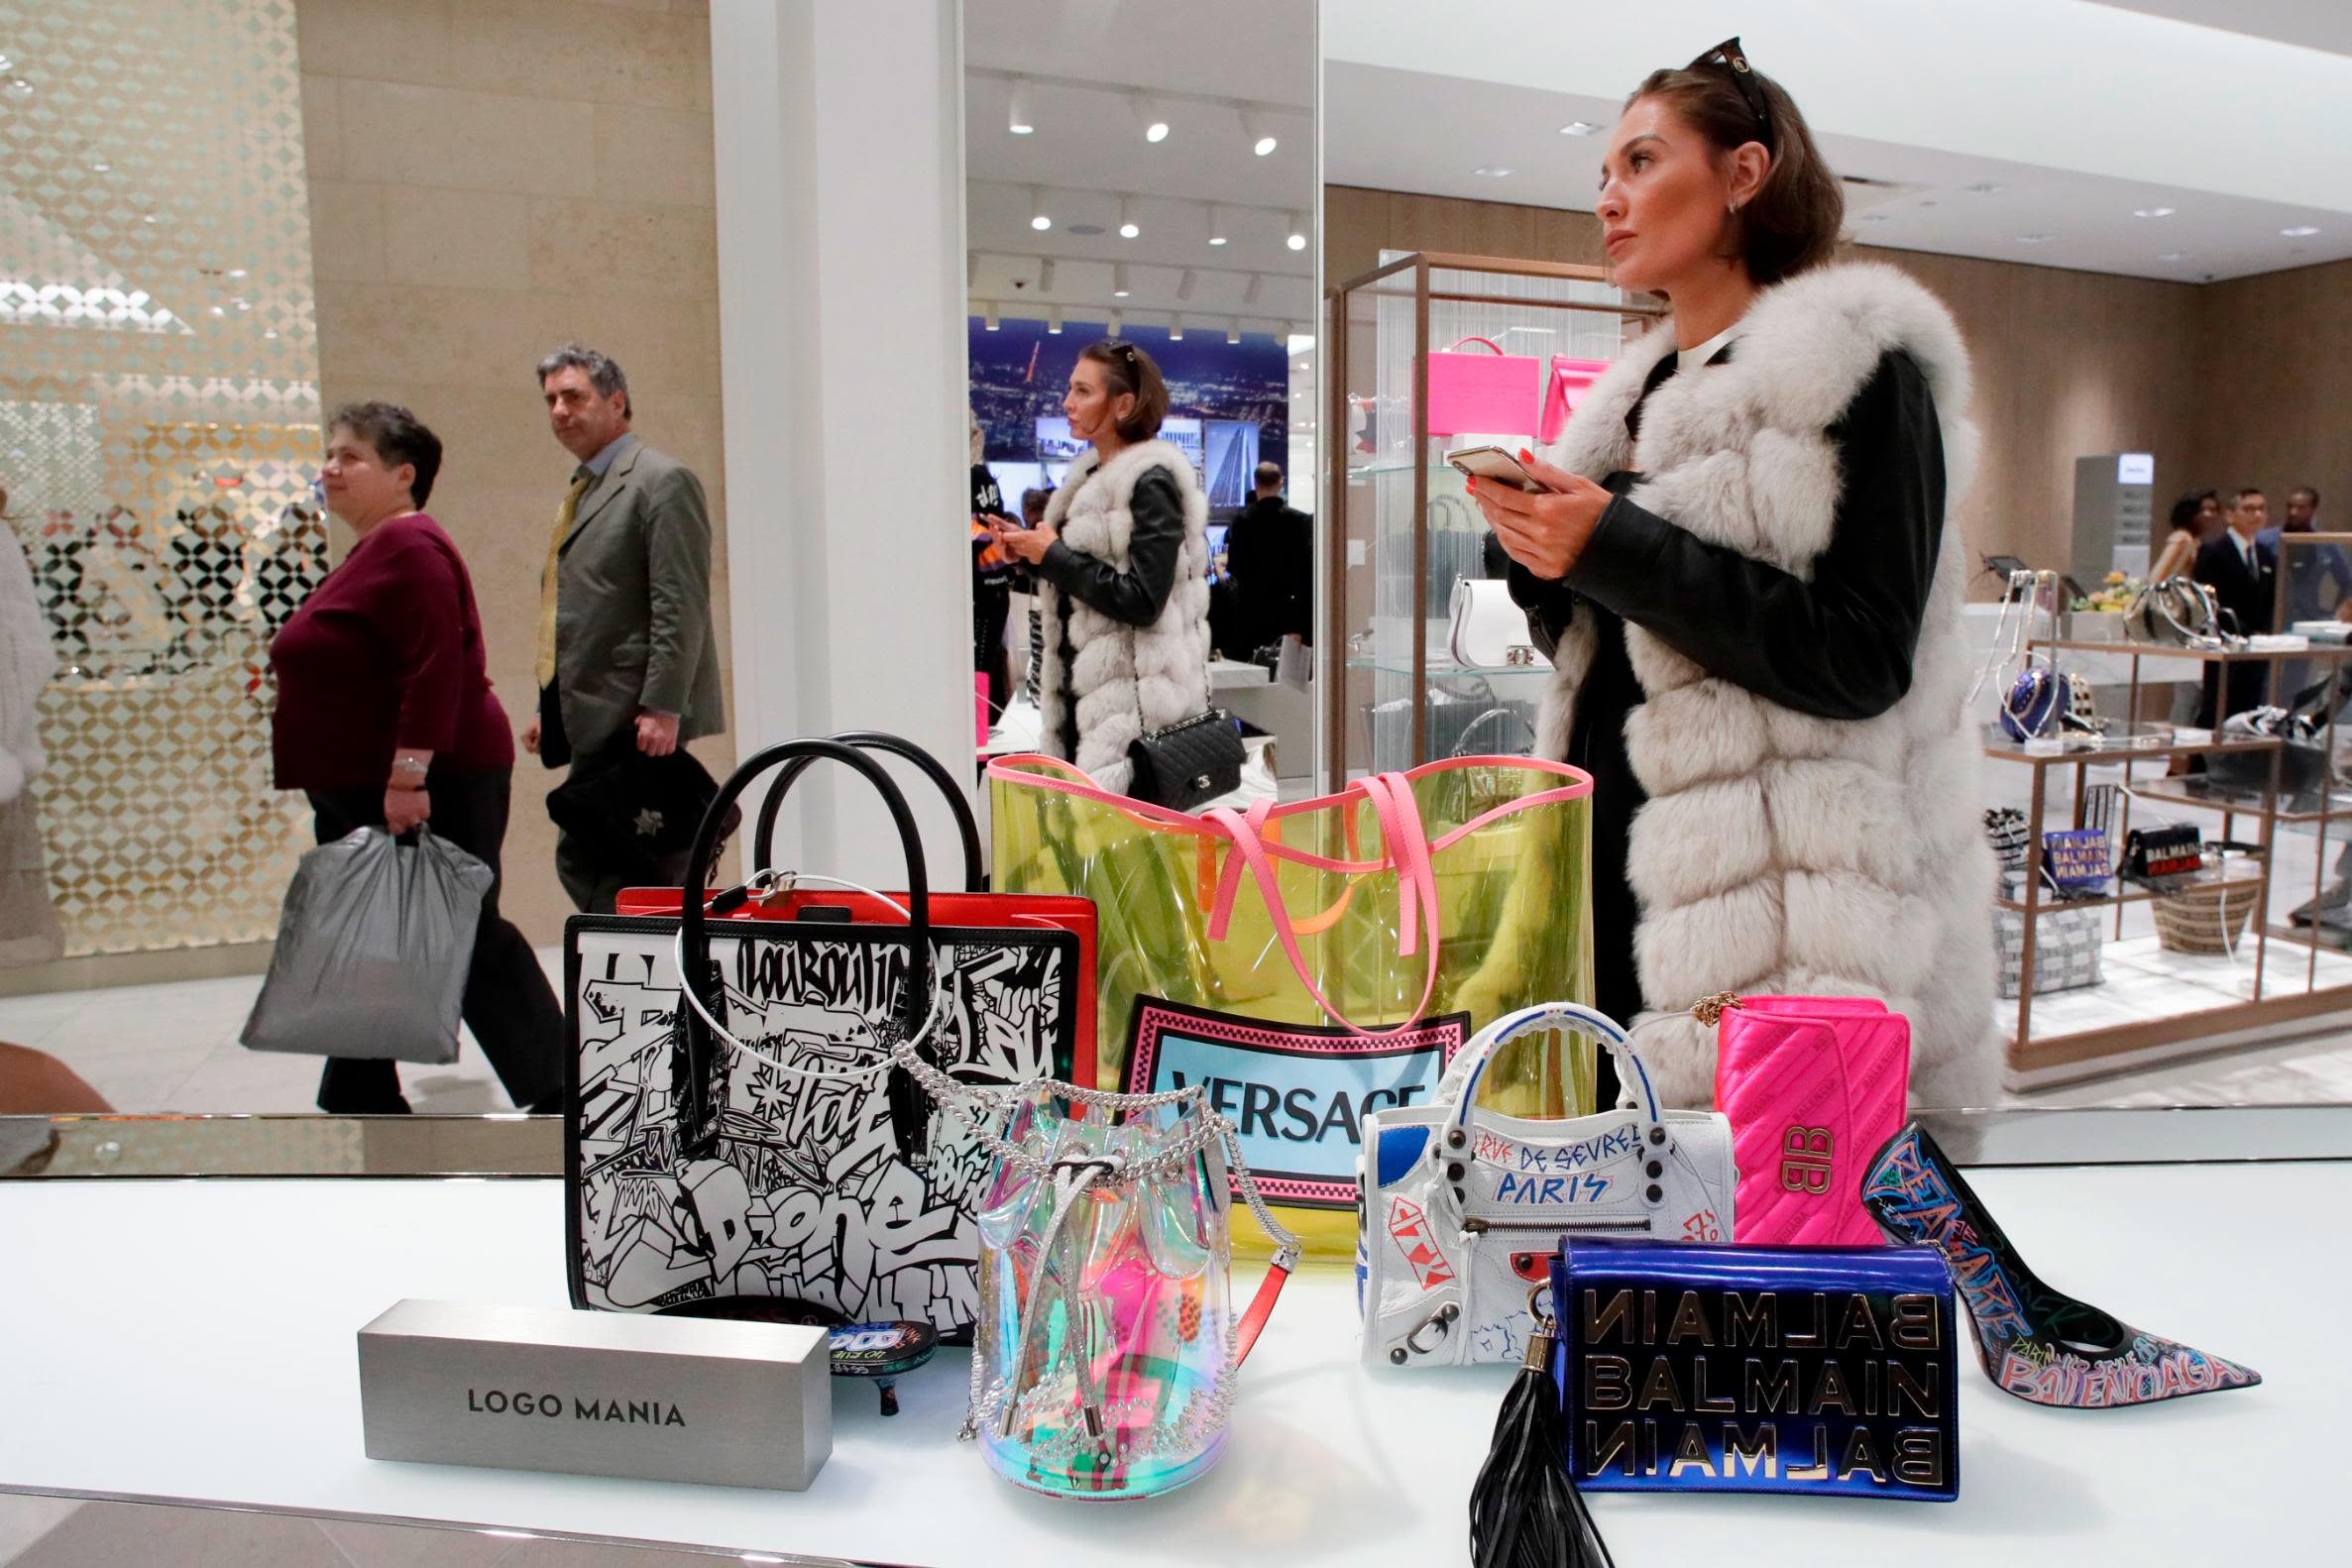 Neiman Marcus and H&M have a plan to win young shoppers: used